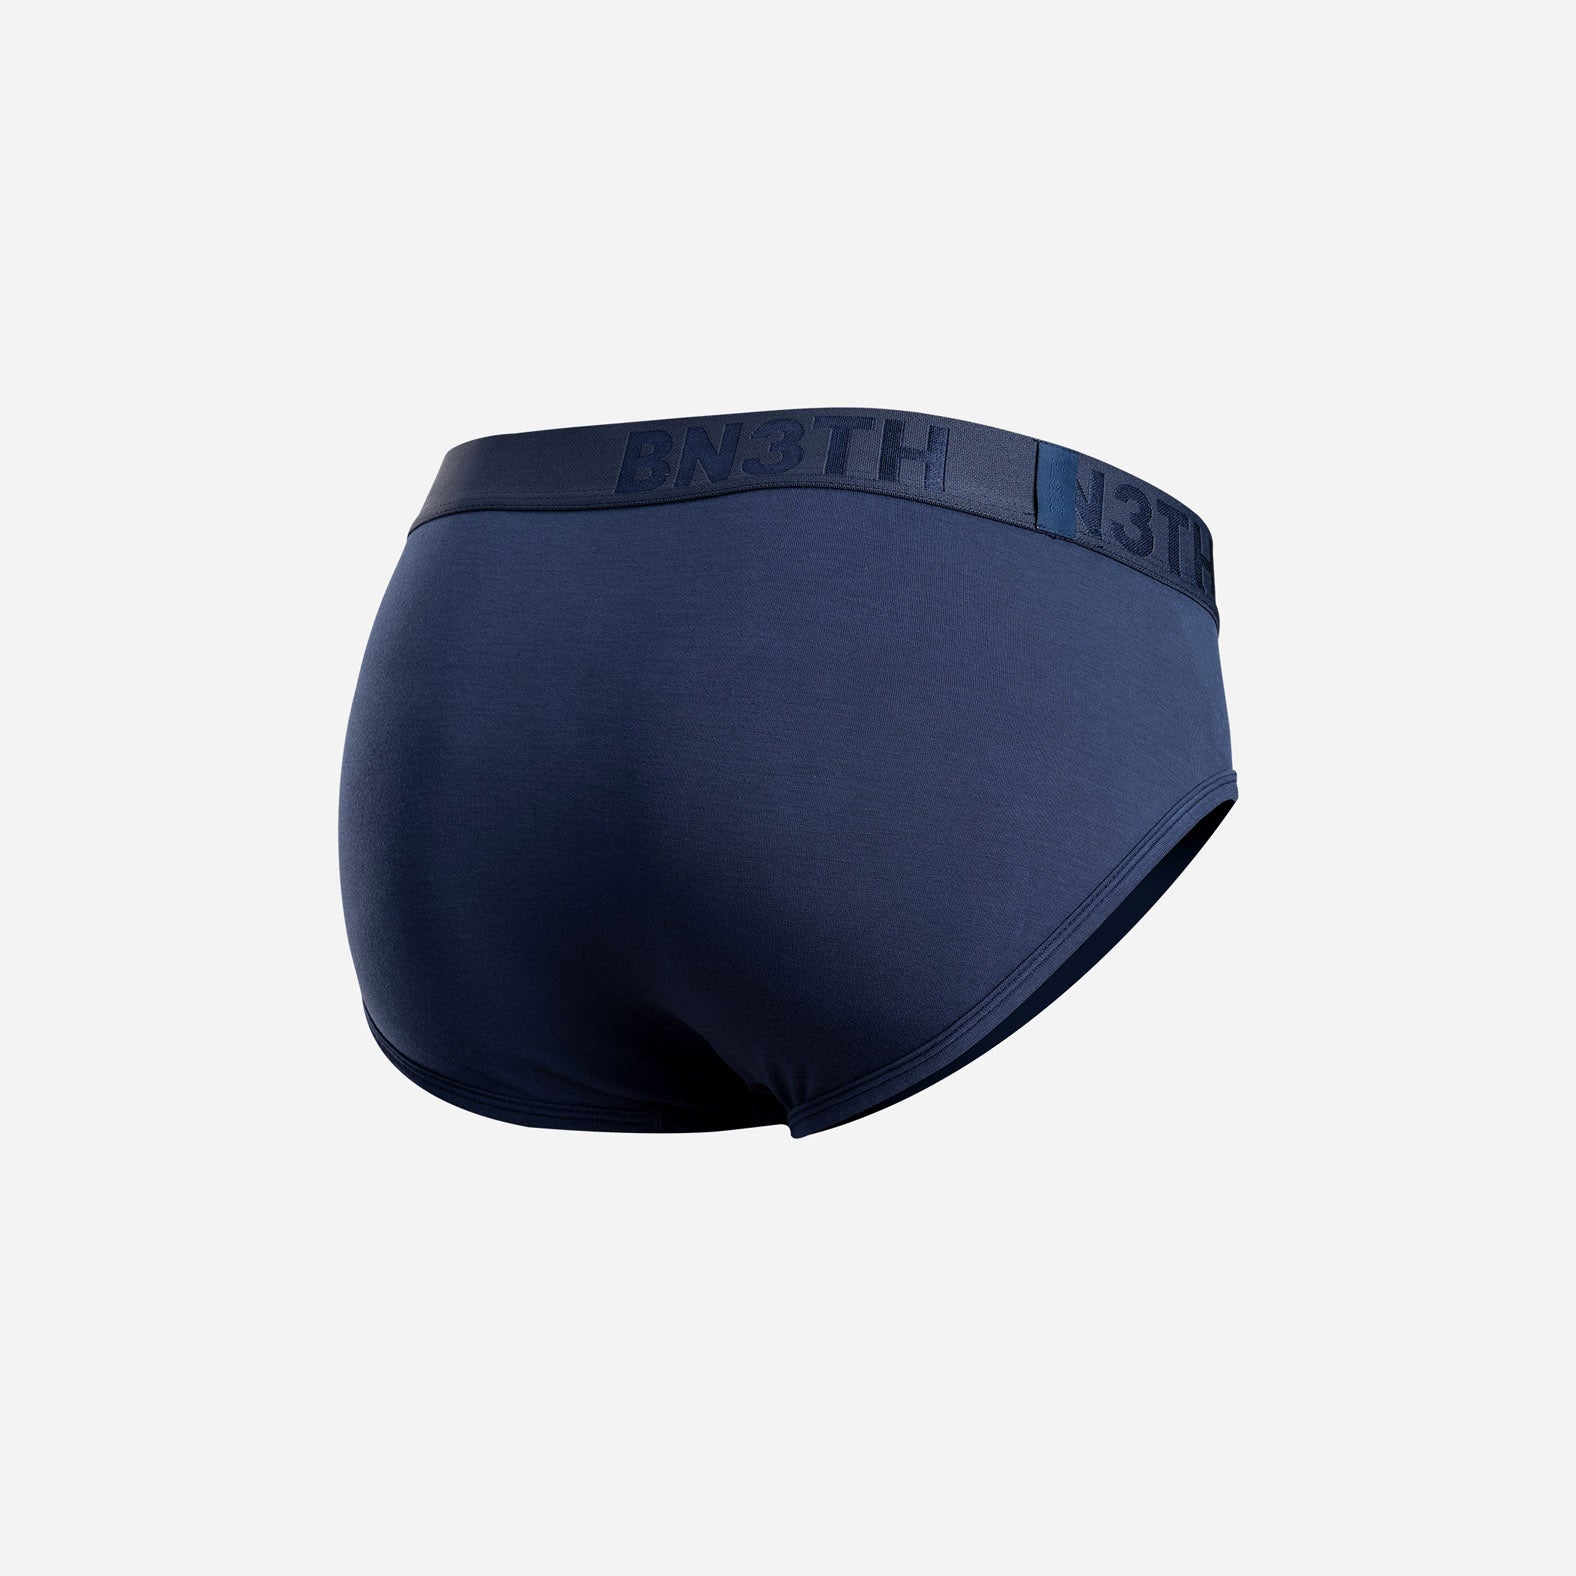 CLASSIC BRIEF WITH FLY: NAVY